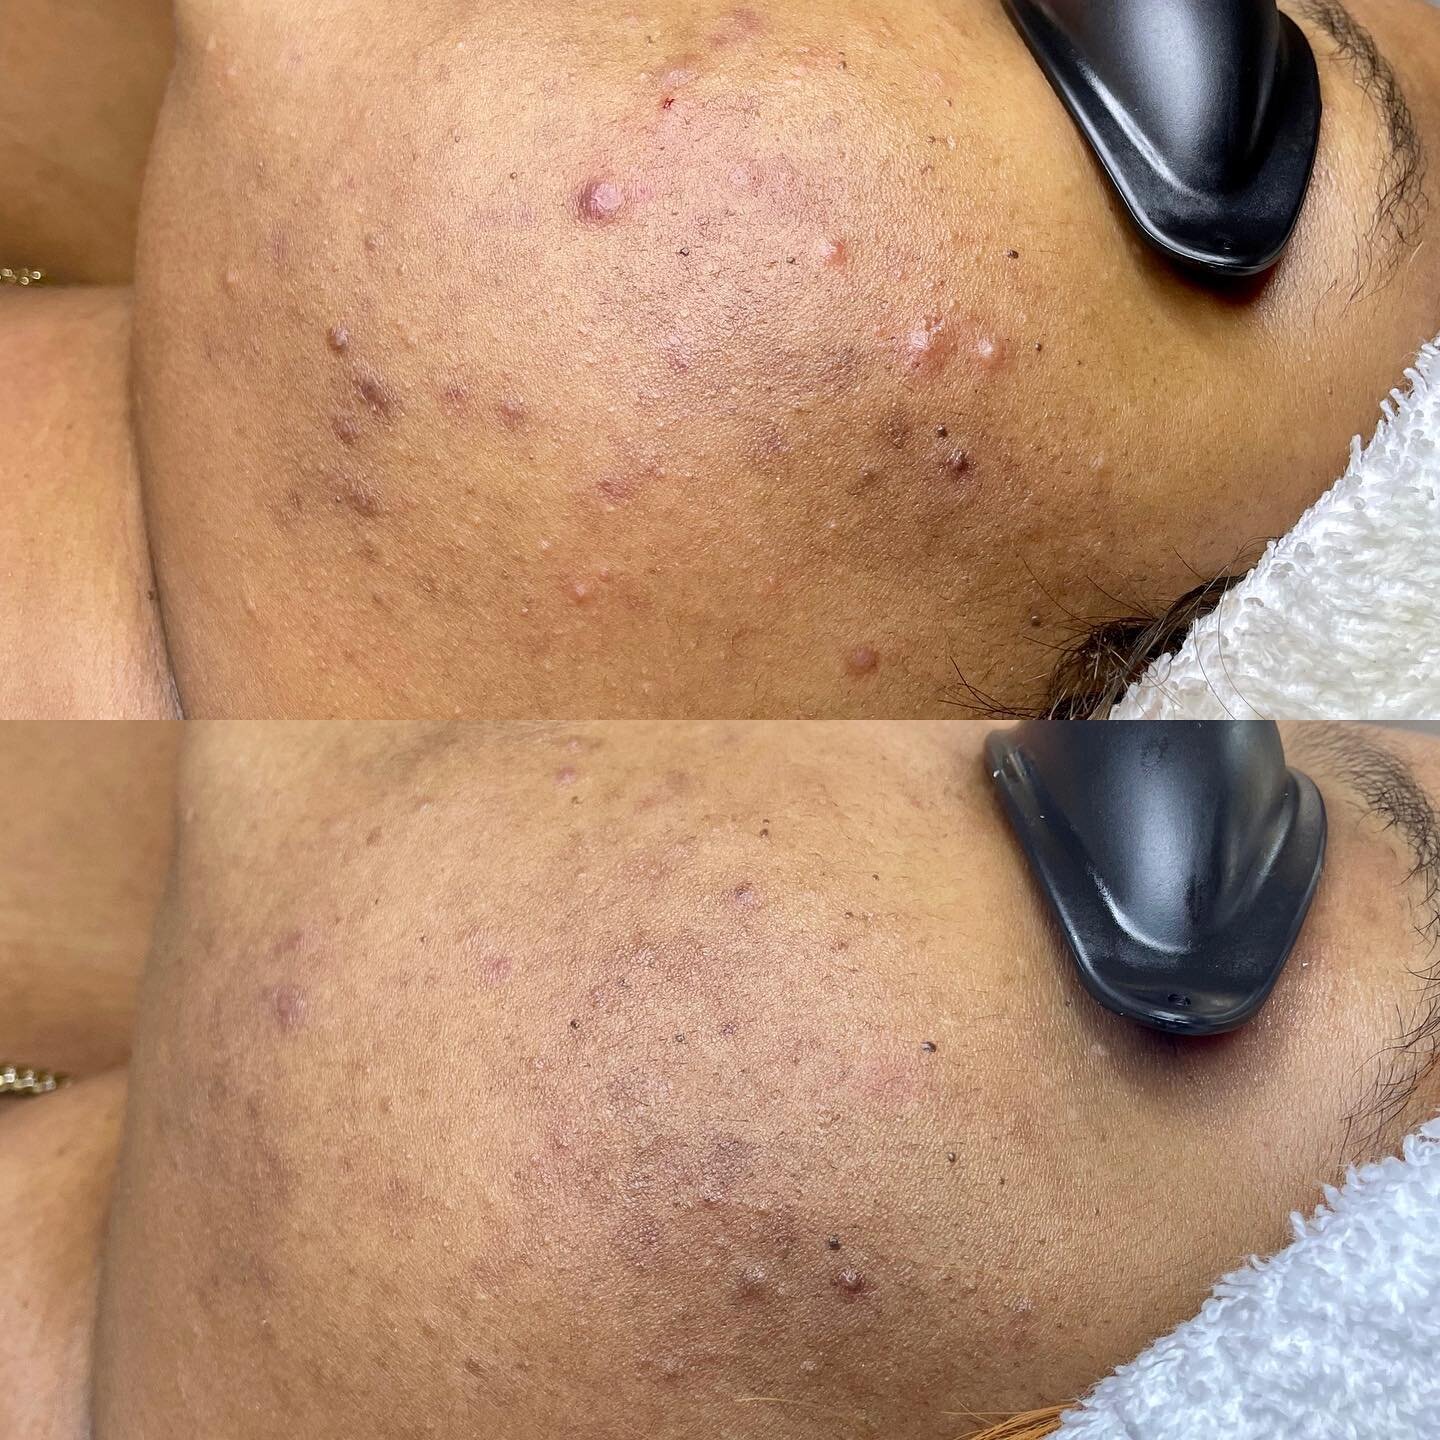 PROGRESS⠀
⠀
4 weeks difference. Subtle, but improvement indeed. 
⠀
Breakouts are clearing, pigmentation has been reduced. Overall skin texture has improved.⠀
⠀
I can&rsquo;t wait to see how much more progress we make as she continues her new home car